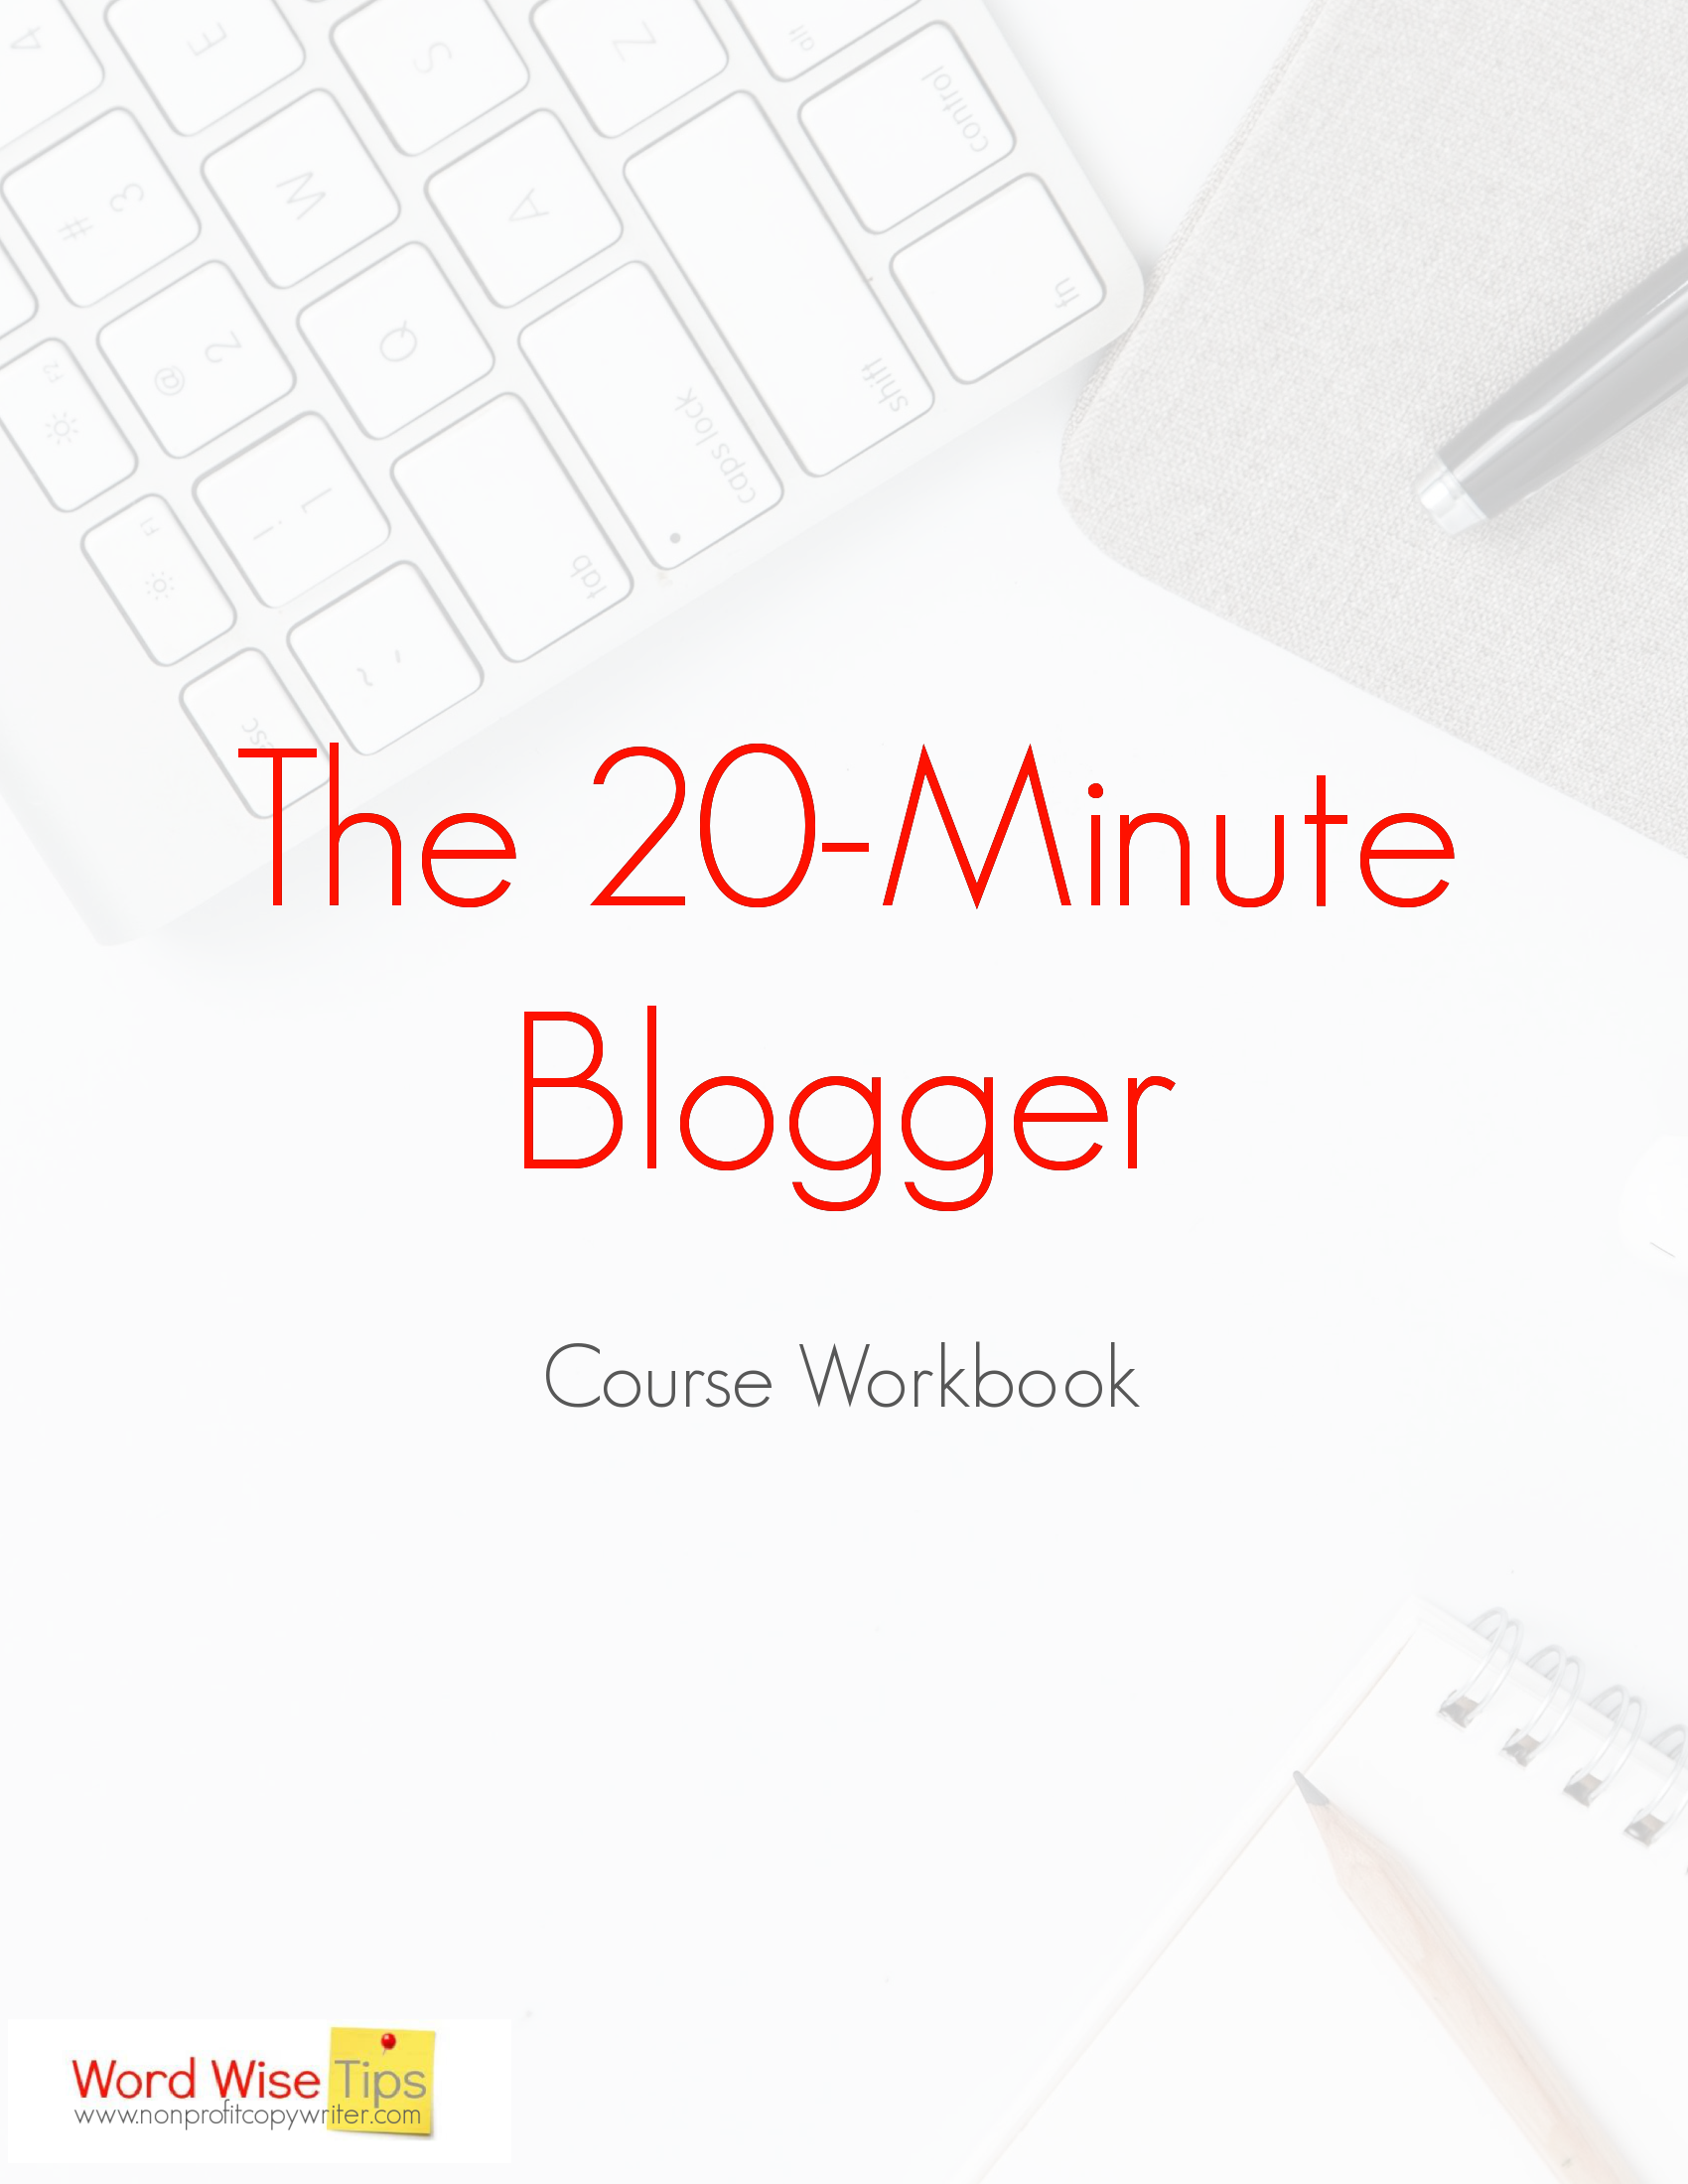 The 20-Minute Blogger: take a writing course that helps you use your time well with Word Wise at Nonprofit Copywriter #Blogging #WritingCourses